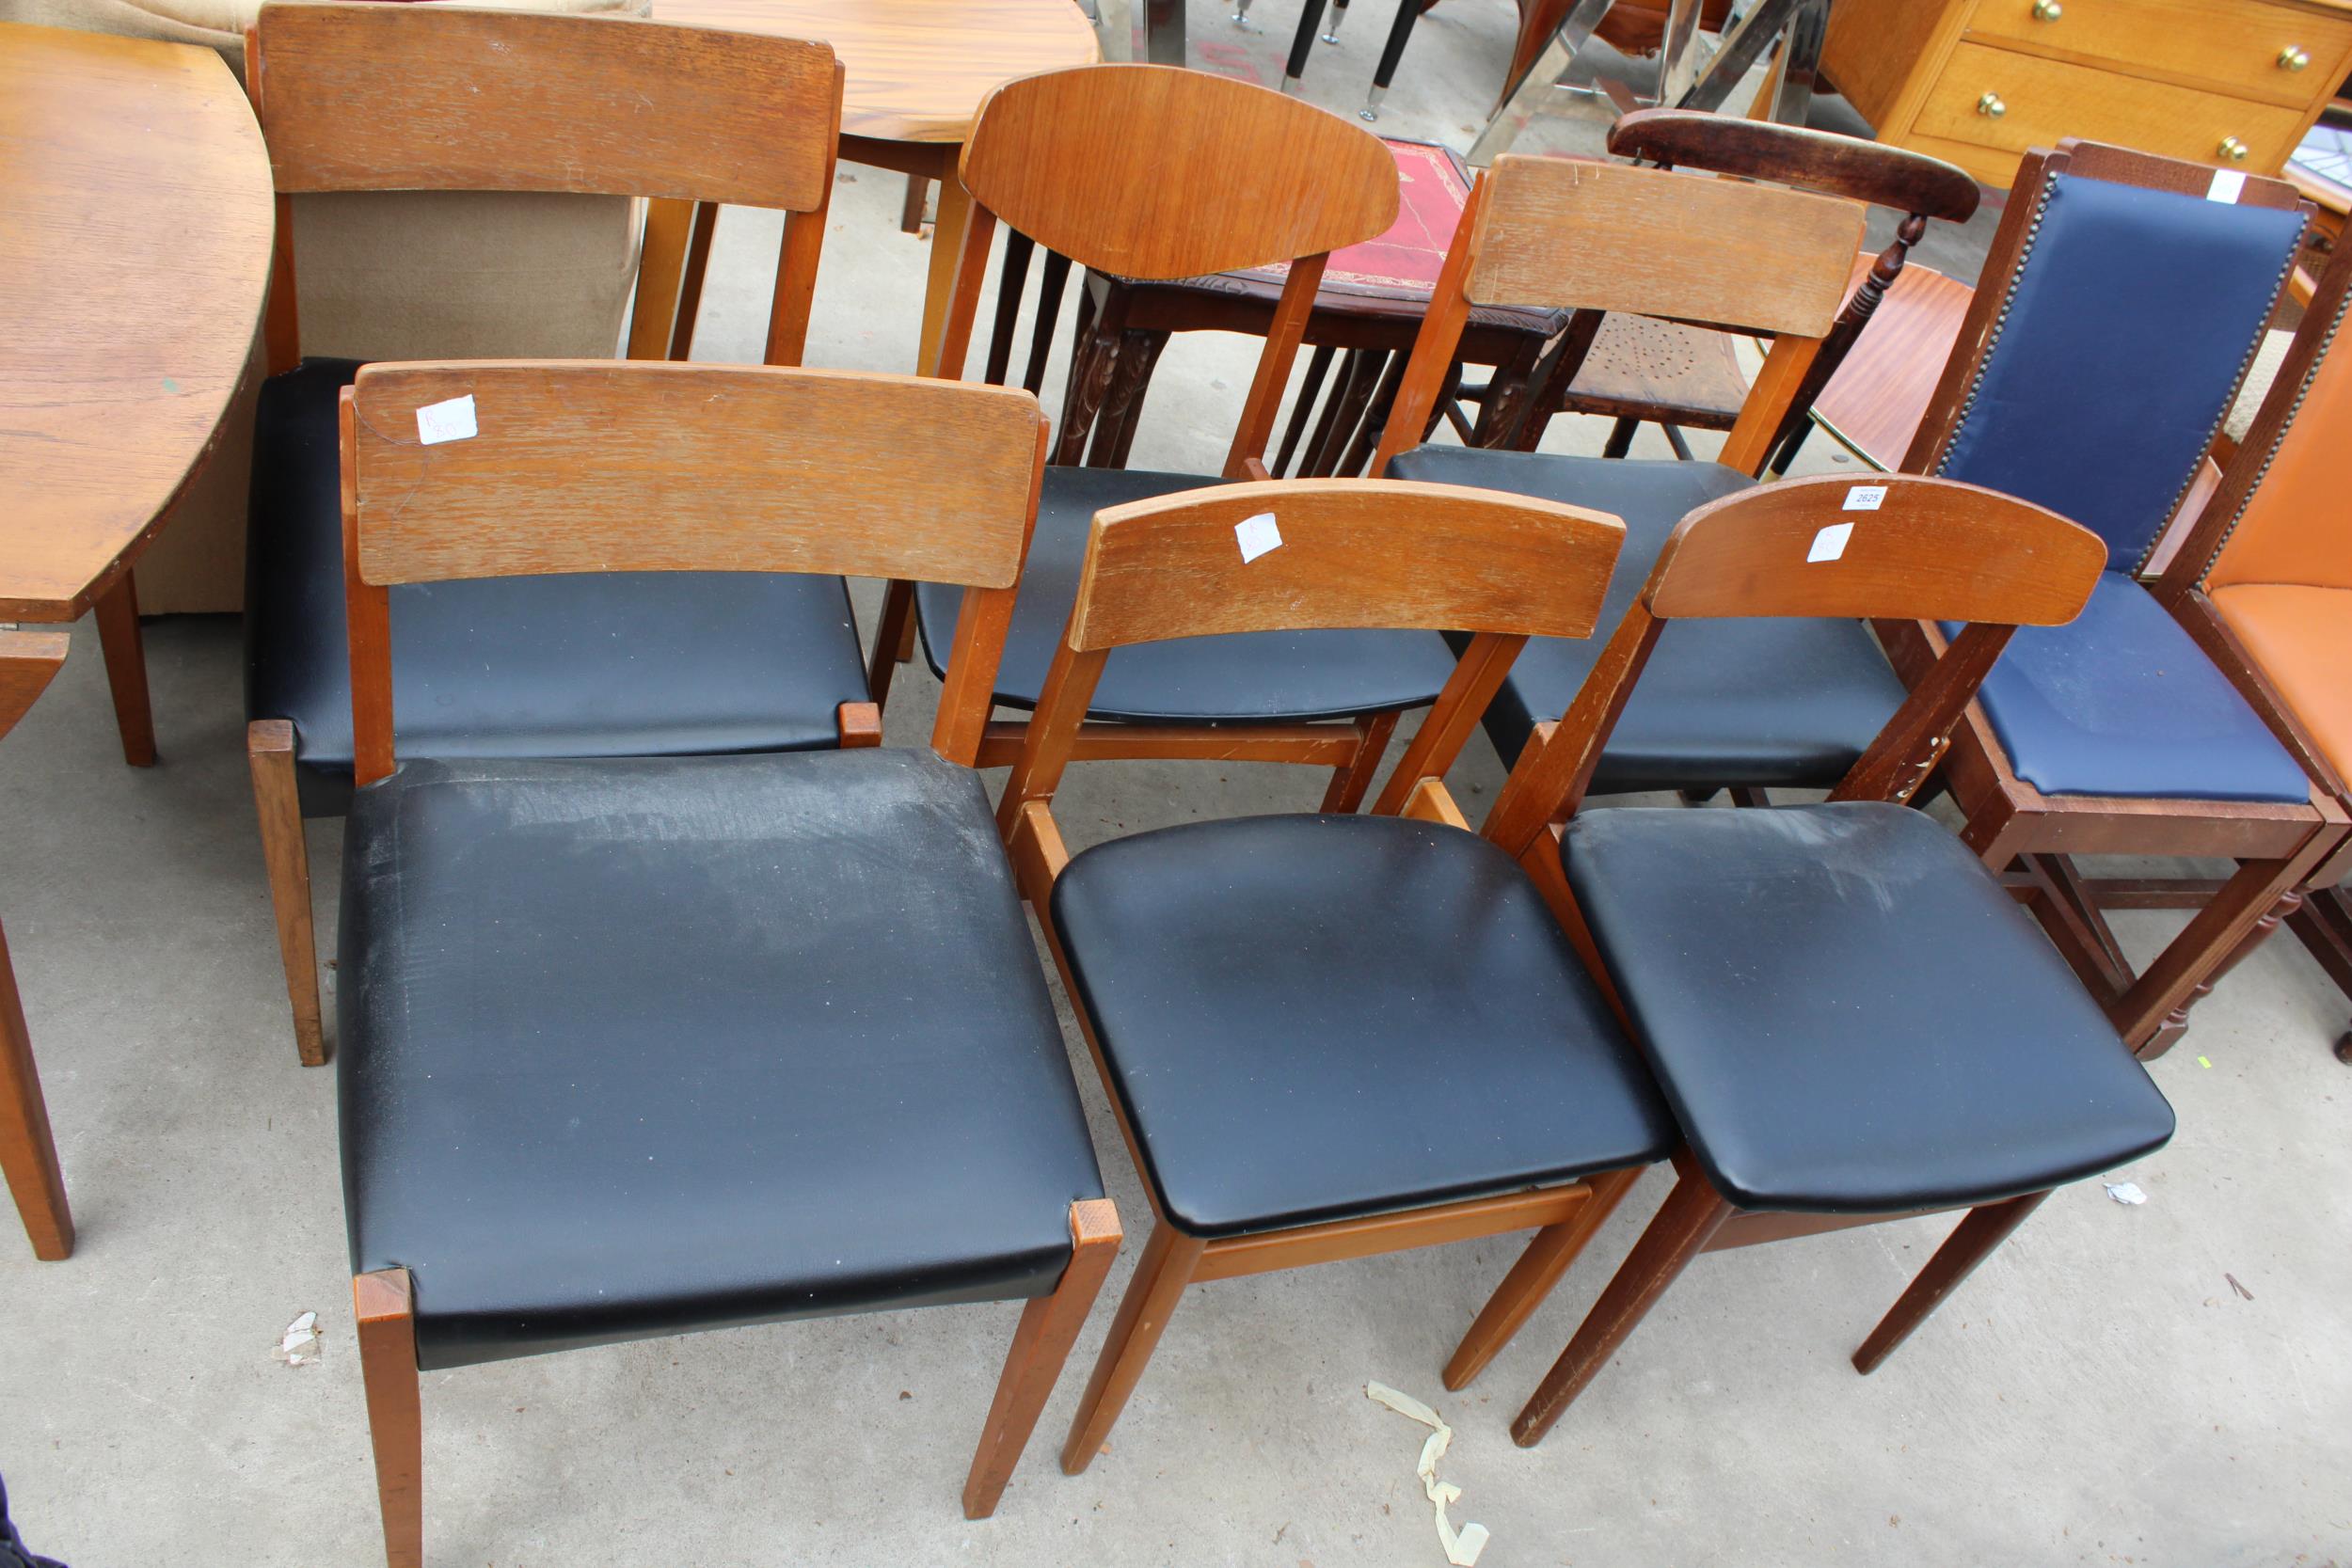 SIX VARIOUS RETRO TEAK DINING CHAIRS AND RETRO TEAK OVAL DROP-LEAF DINING TABLE, 49" X 45" OPENED - Image 3 of 3